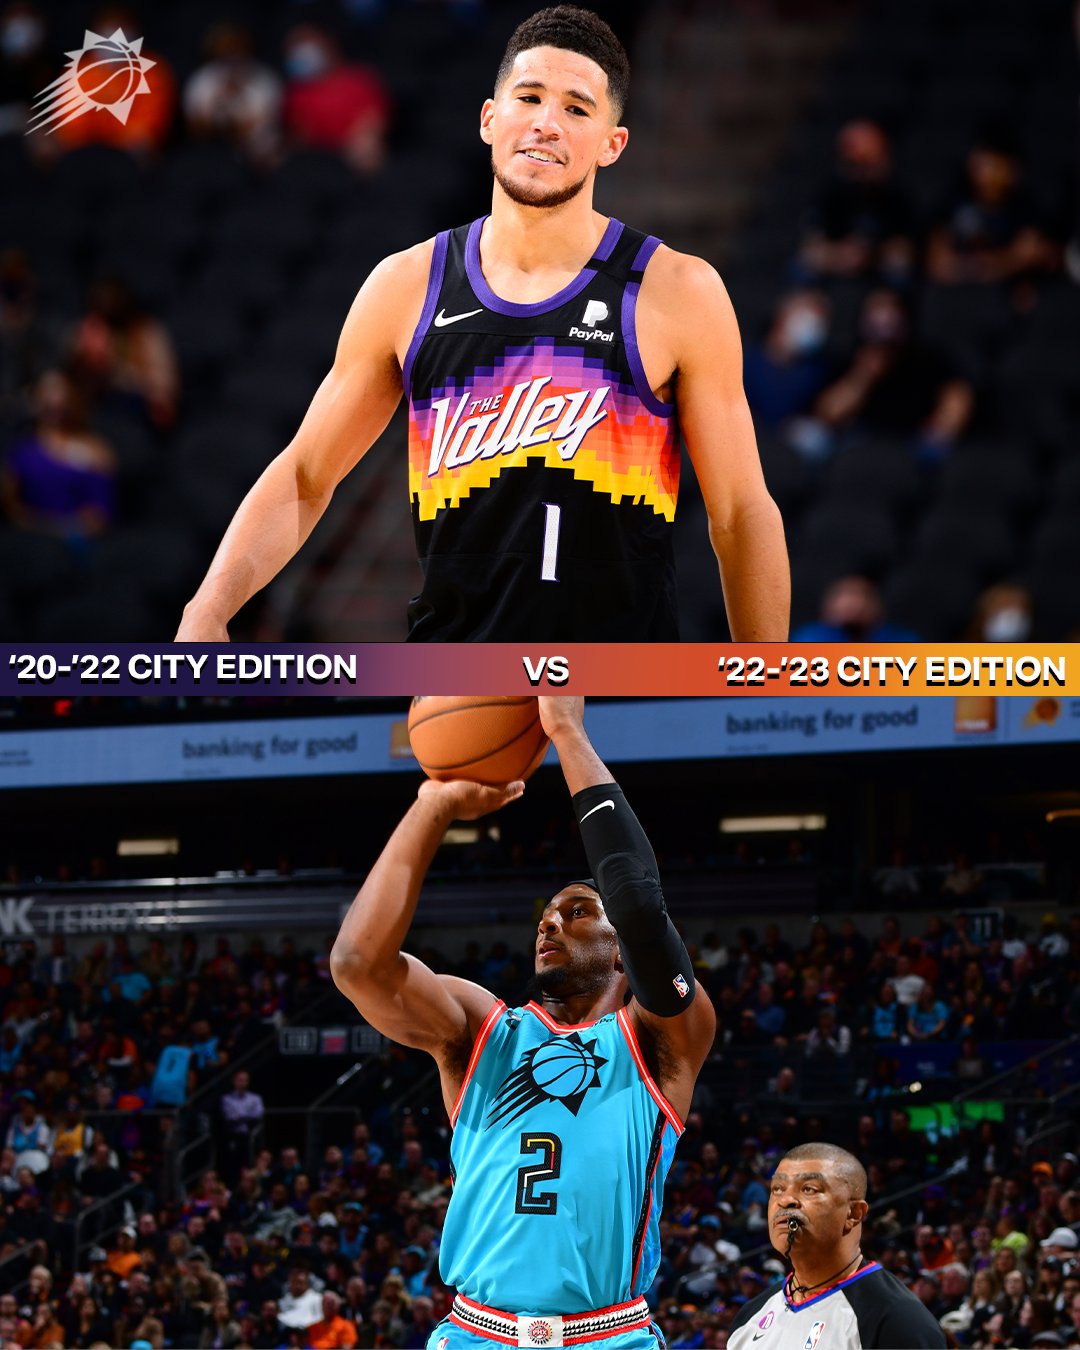 Jersey mashup shows Coyotes uniform in Suns colorway